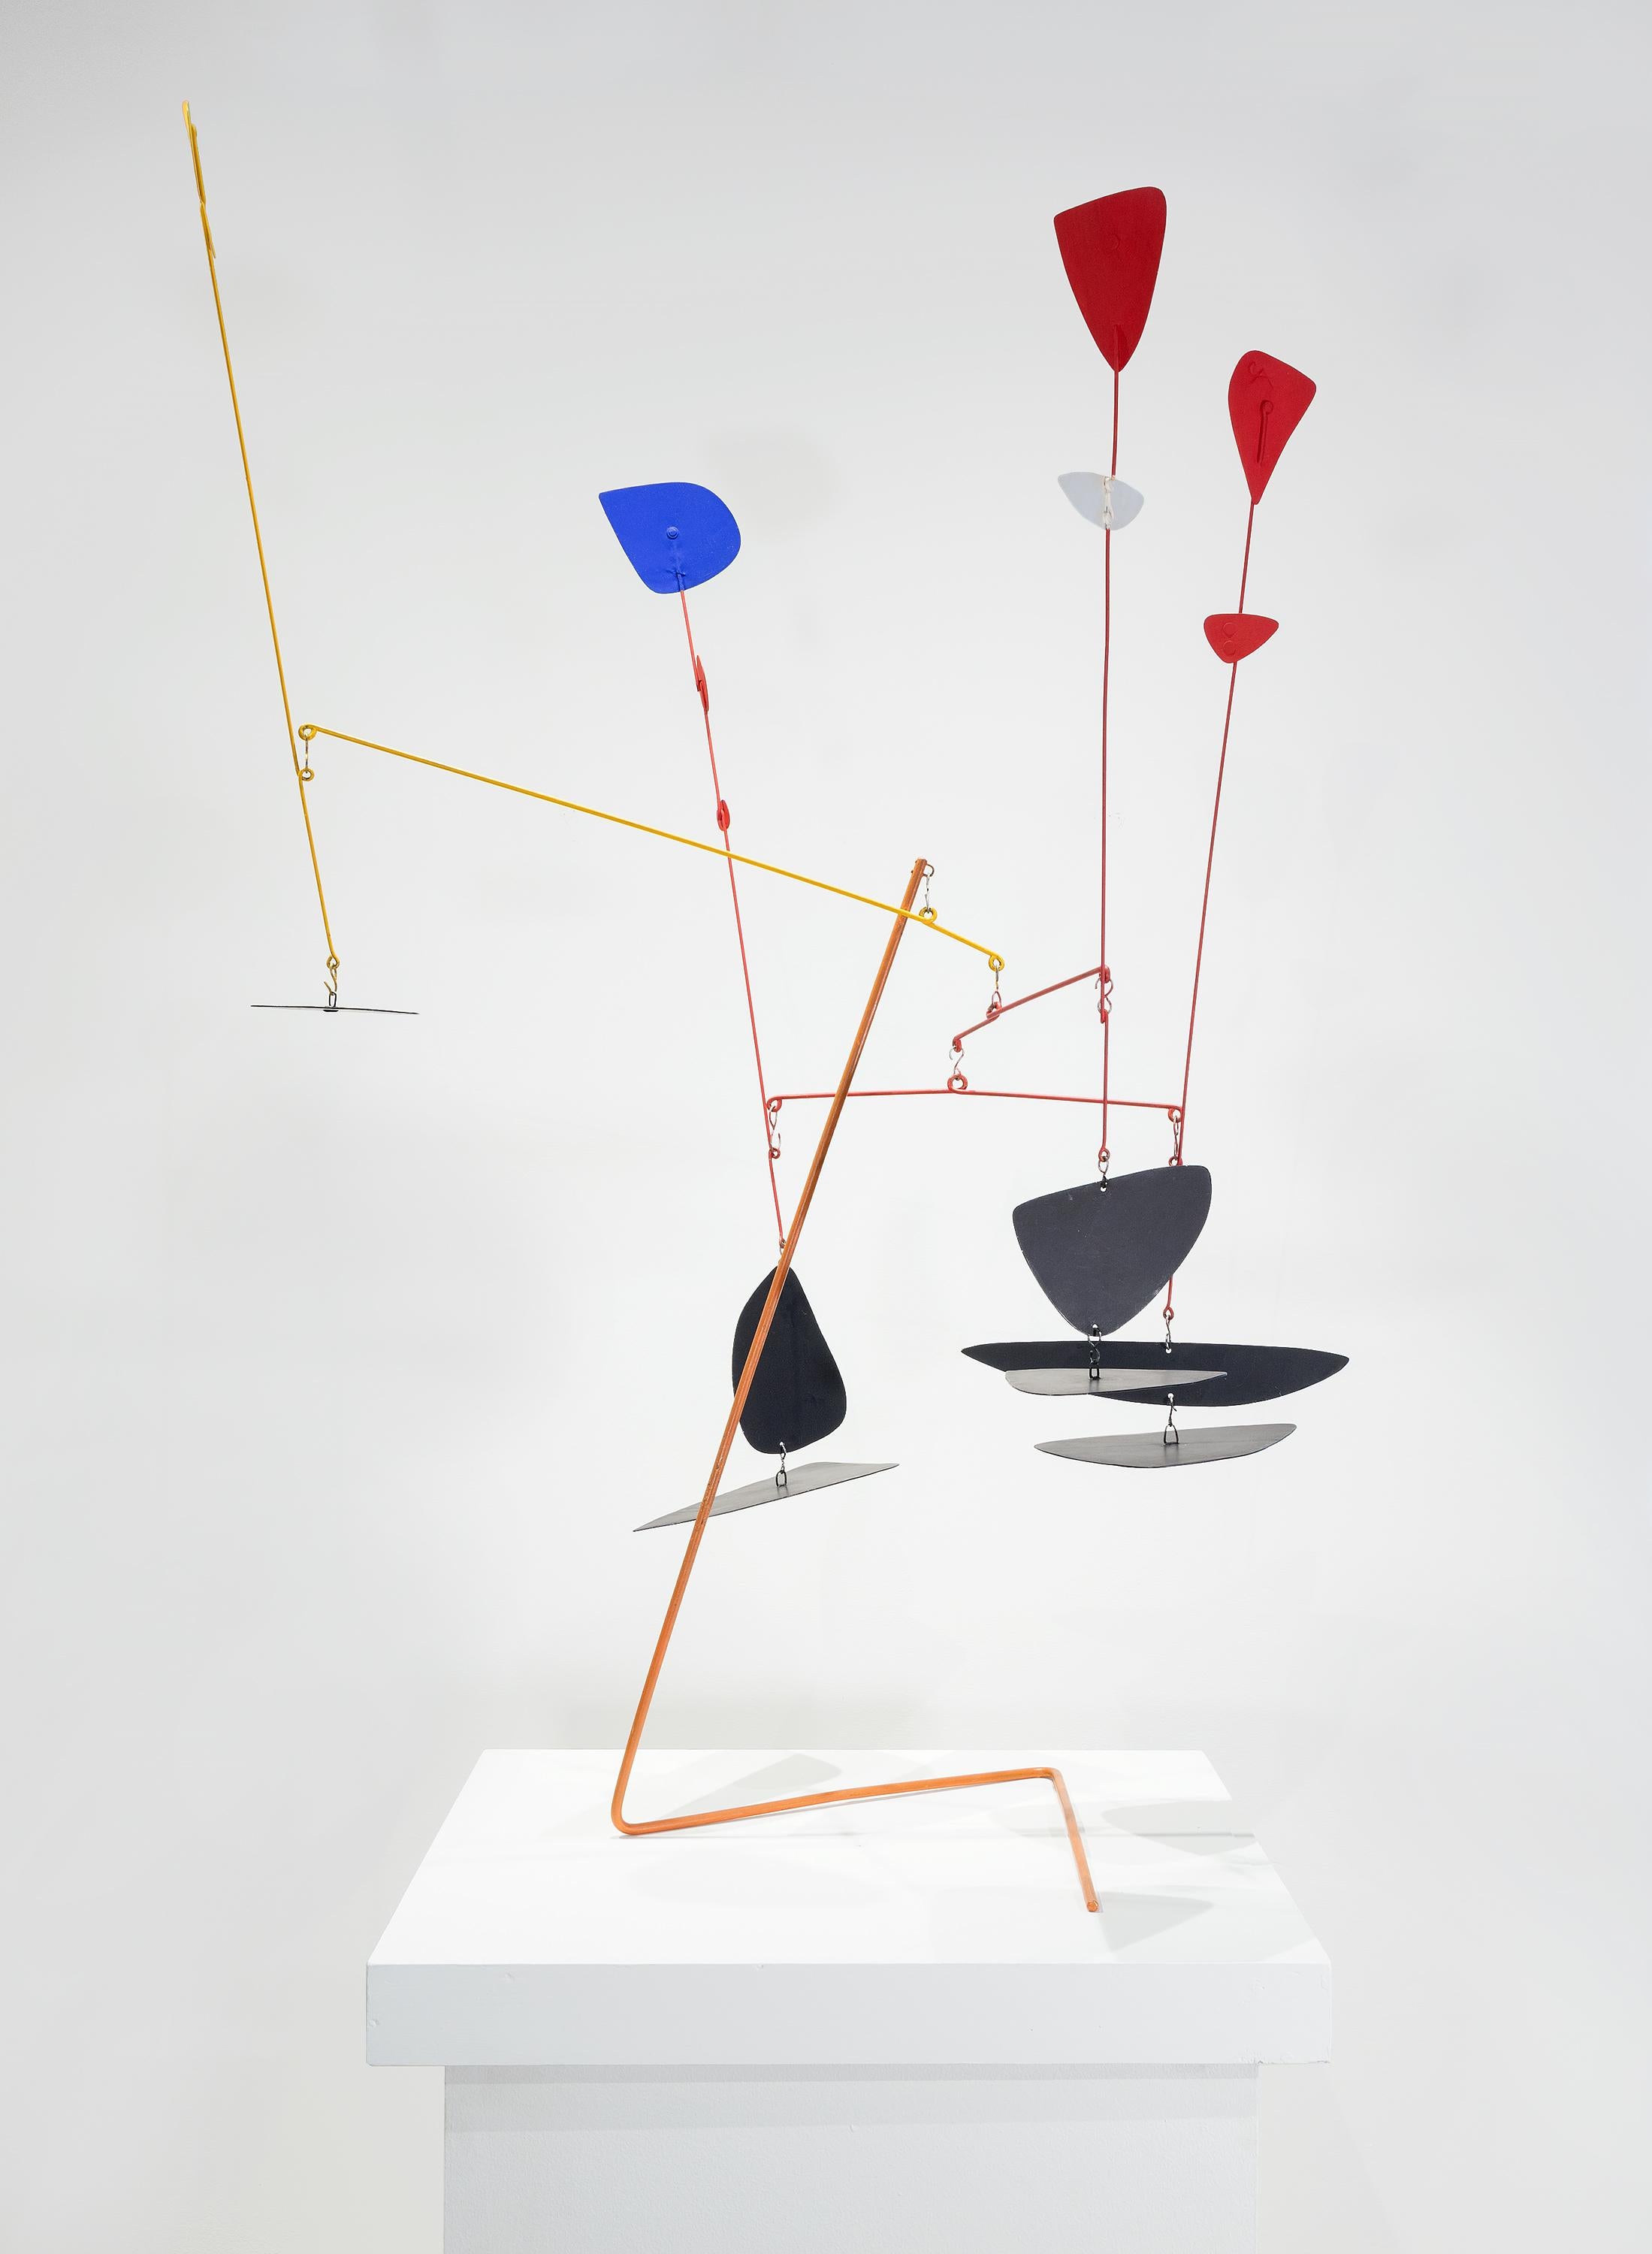 Prelude to the Man Eater, A03849 - Abstract Sculpture by Alexander Calder